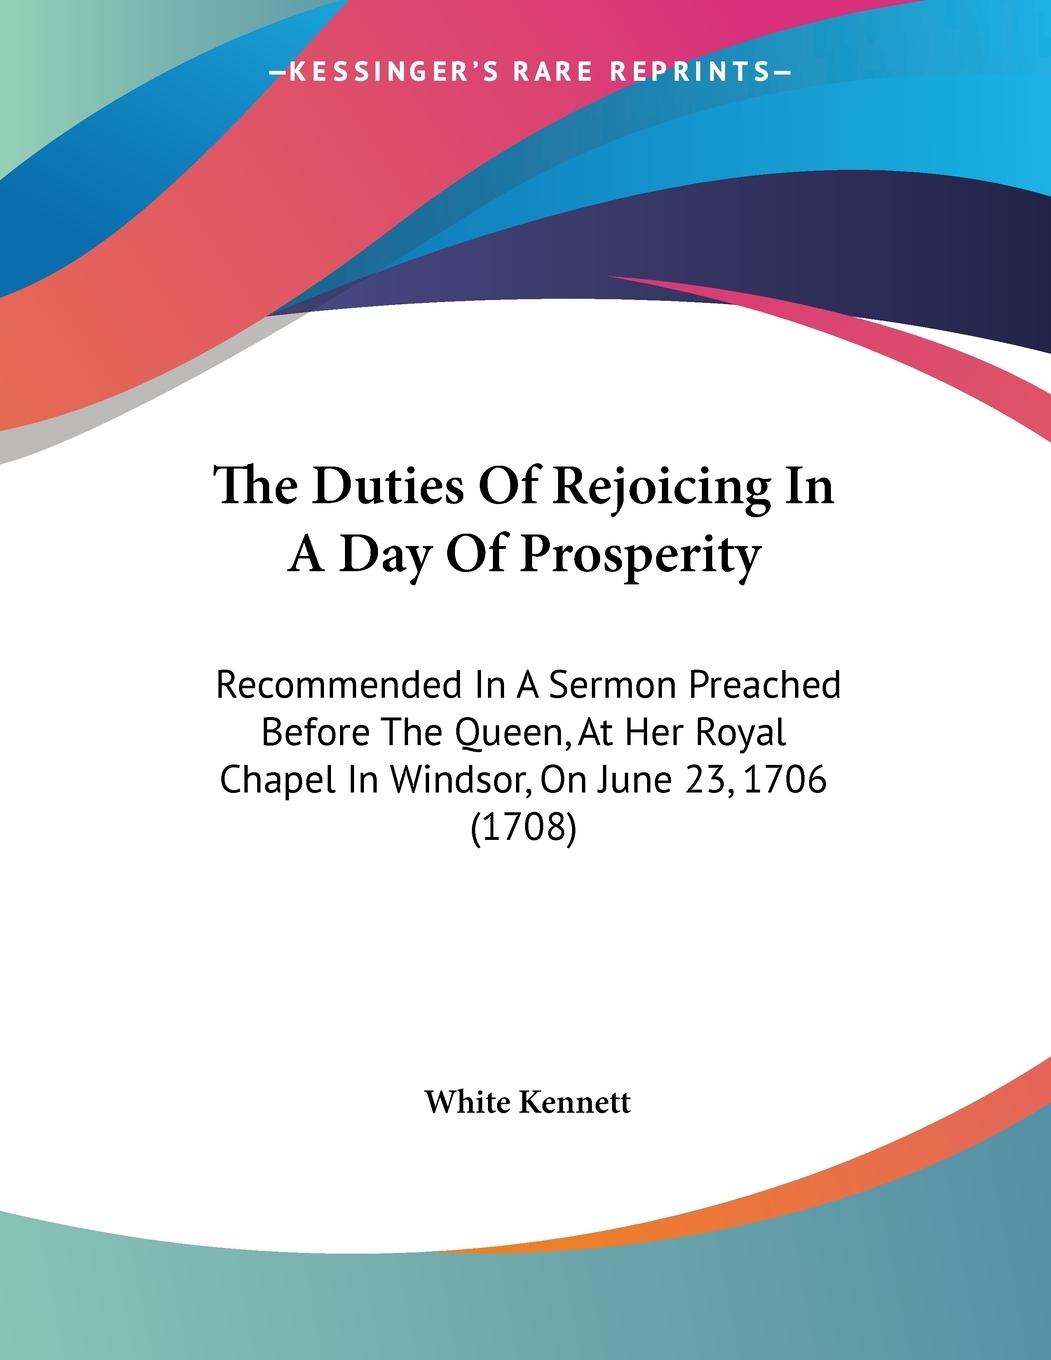 The Duties Of Rejoicing In A Day Of Prosperity - Kennett, White